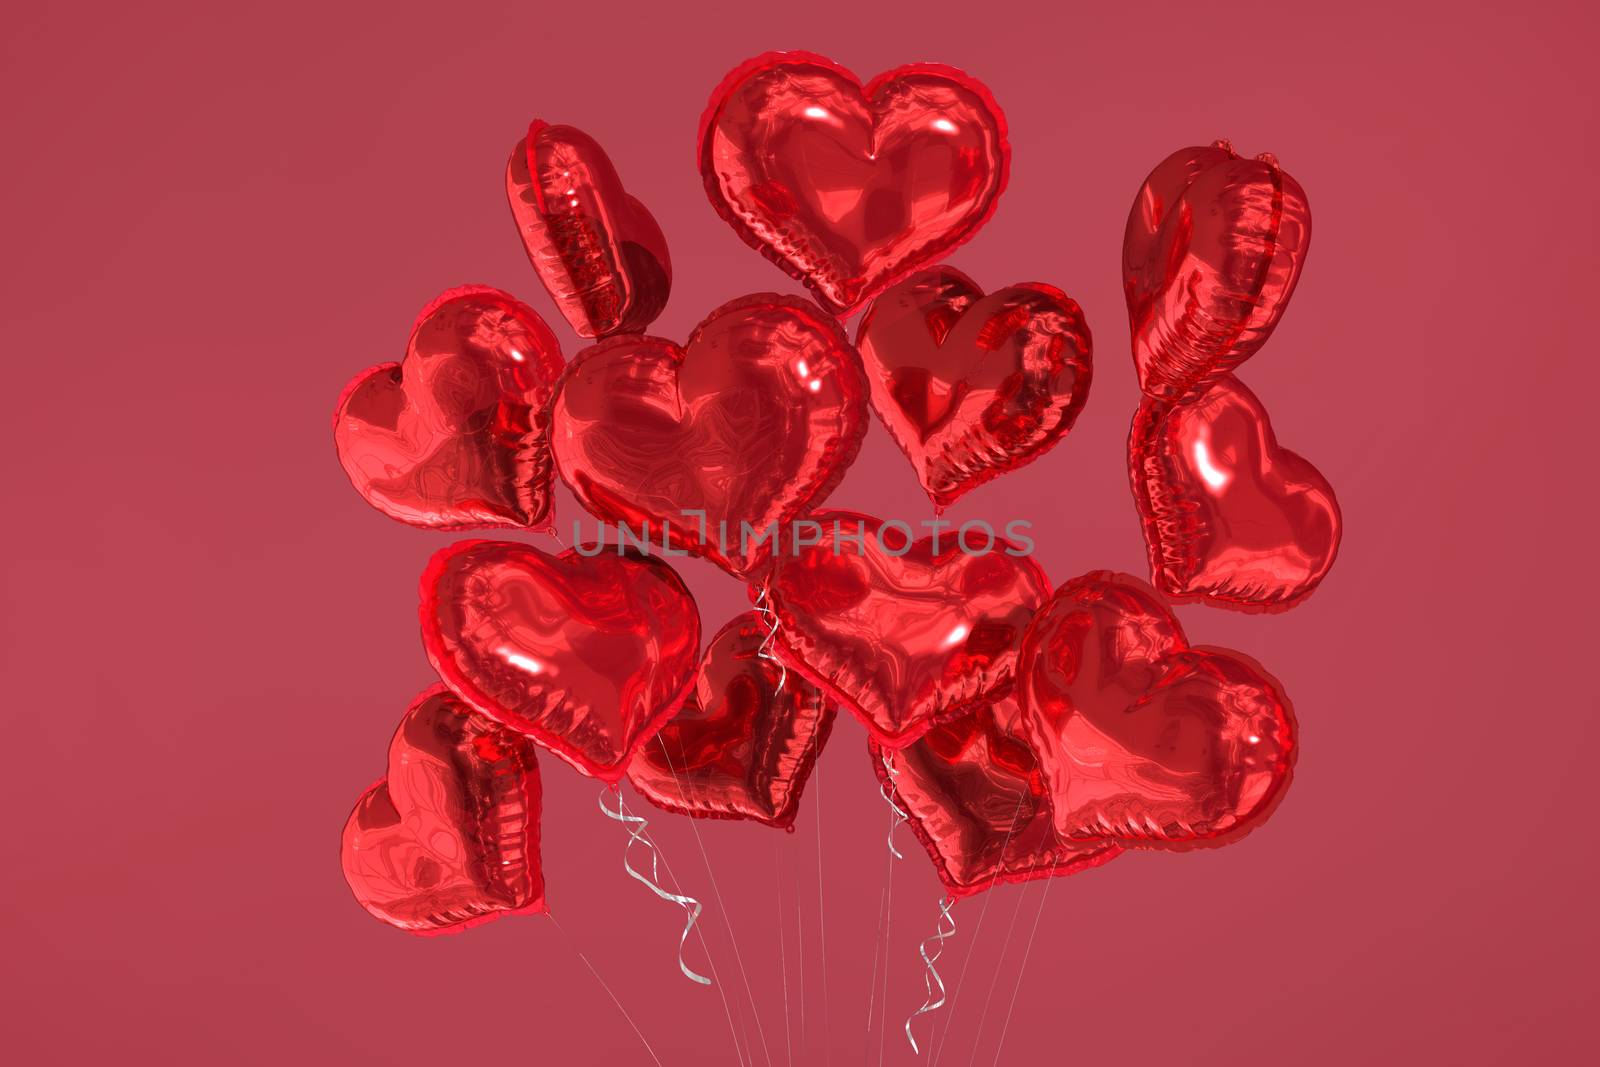 Heart balloons against red